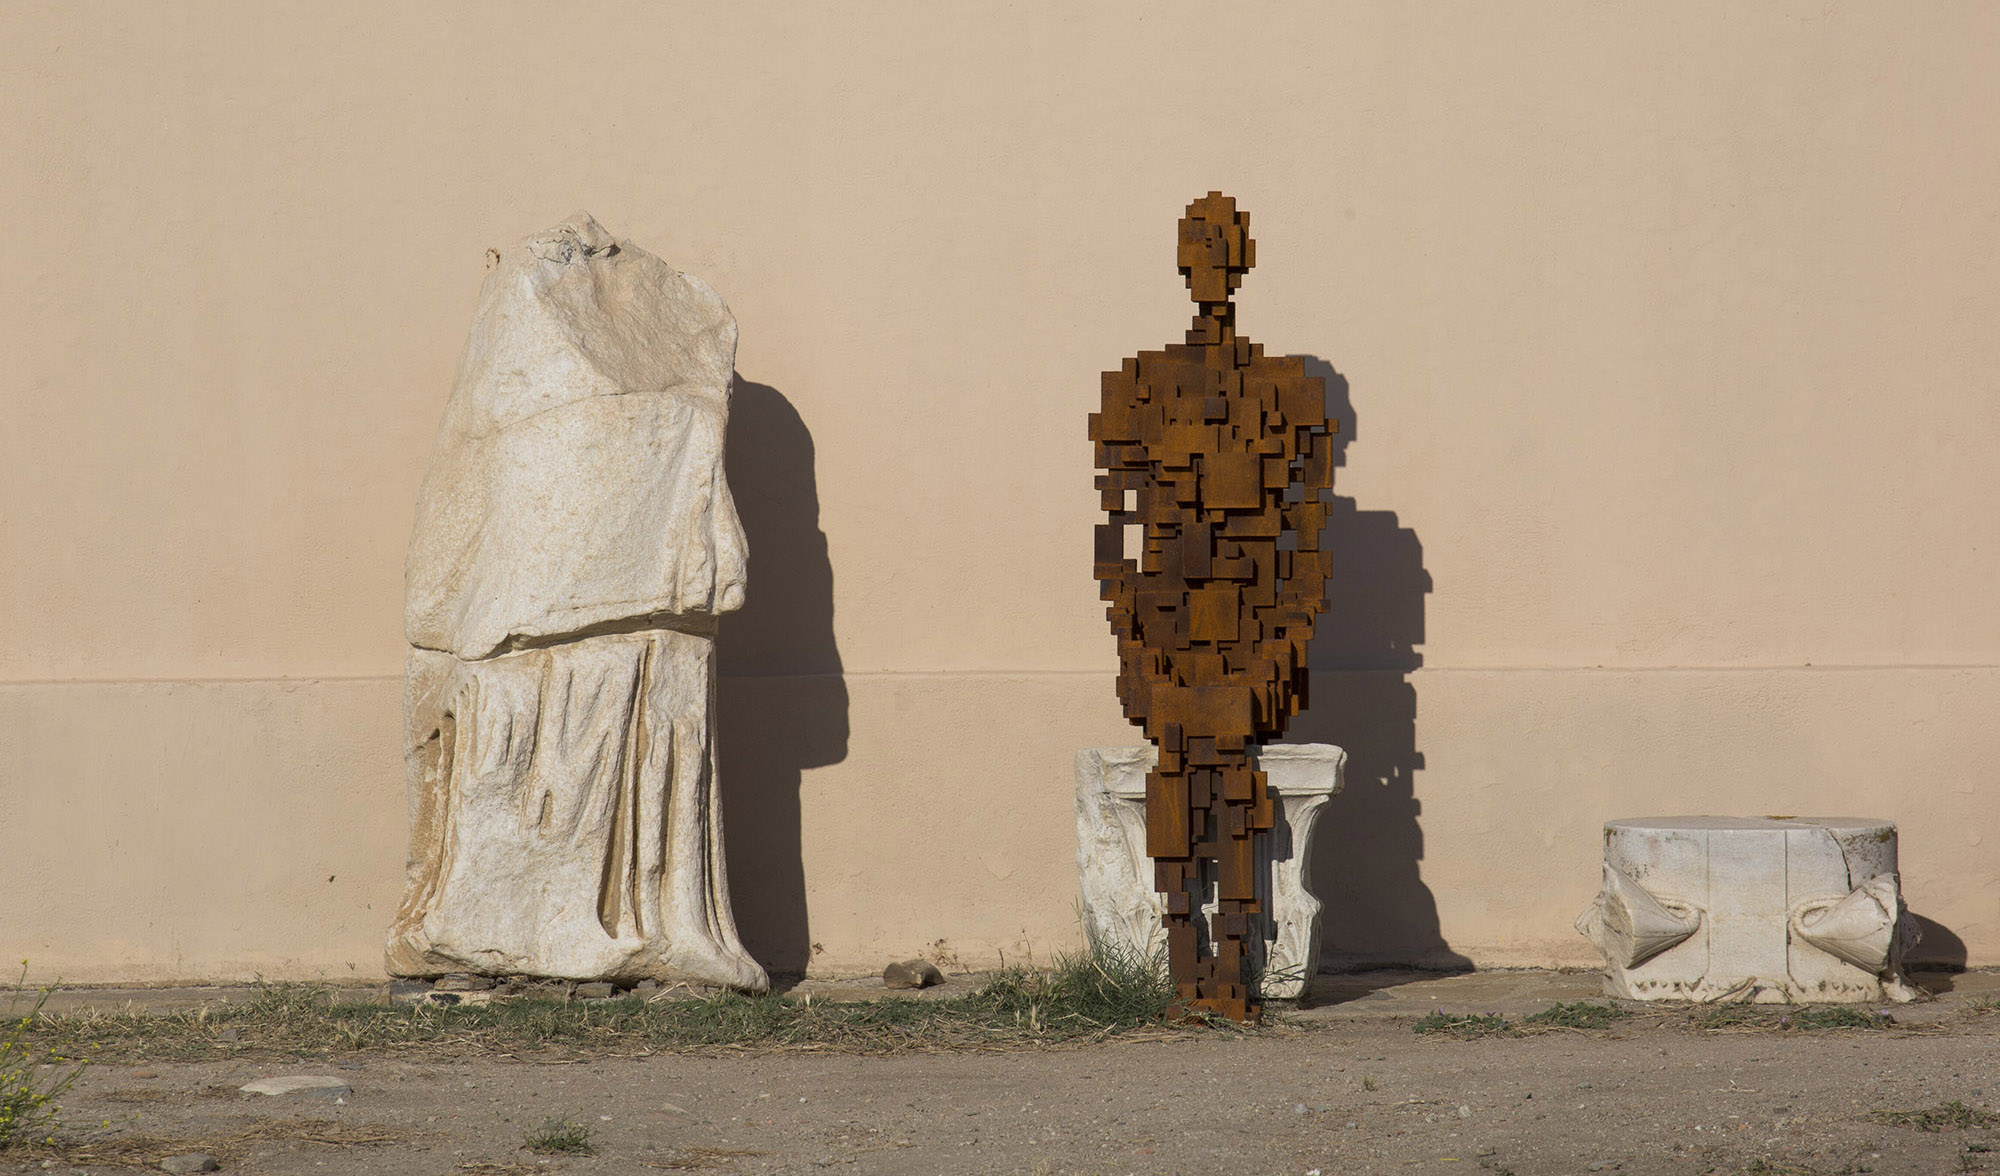 Фото: Oak Taylor Smith / Courtesy NEON; Ephorate of Antiquities of Cyclades & the artist